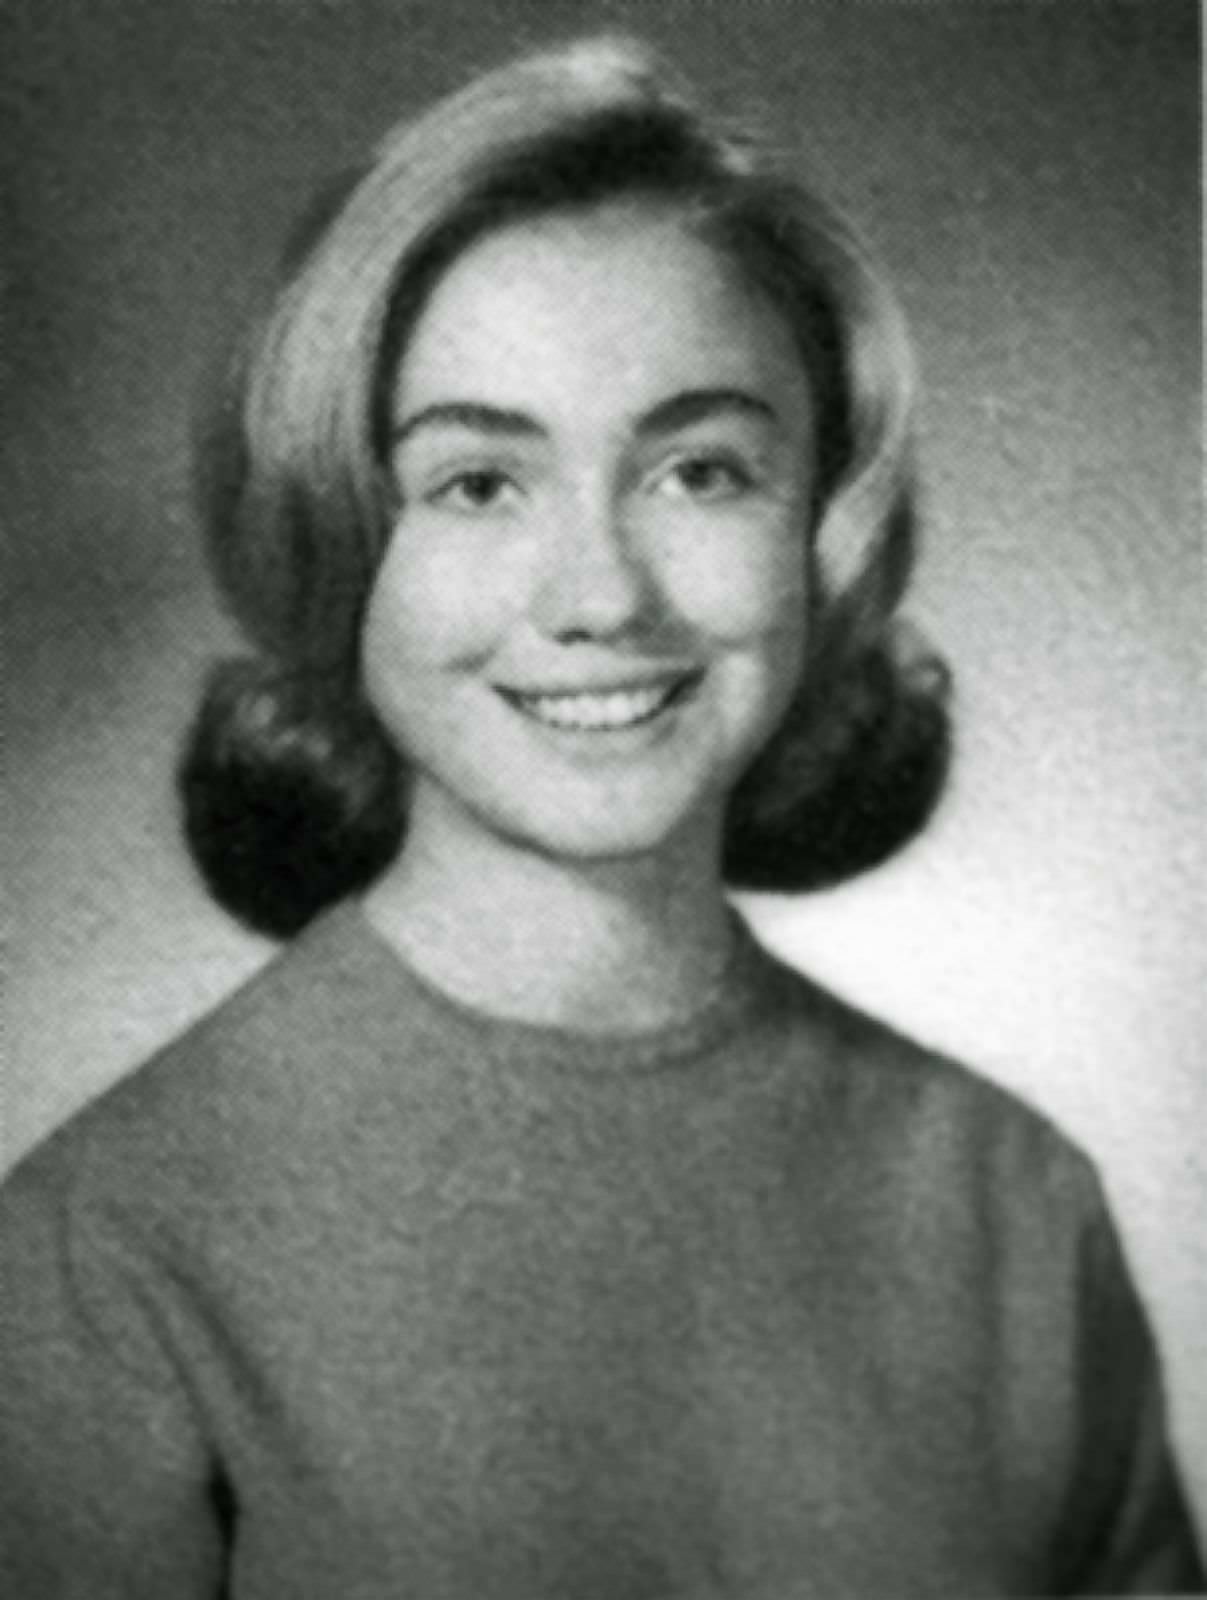 Portrait of Hillary as a student, 1965